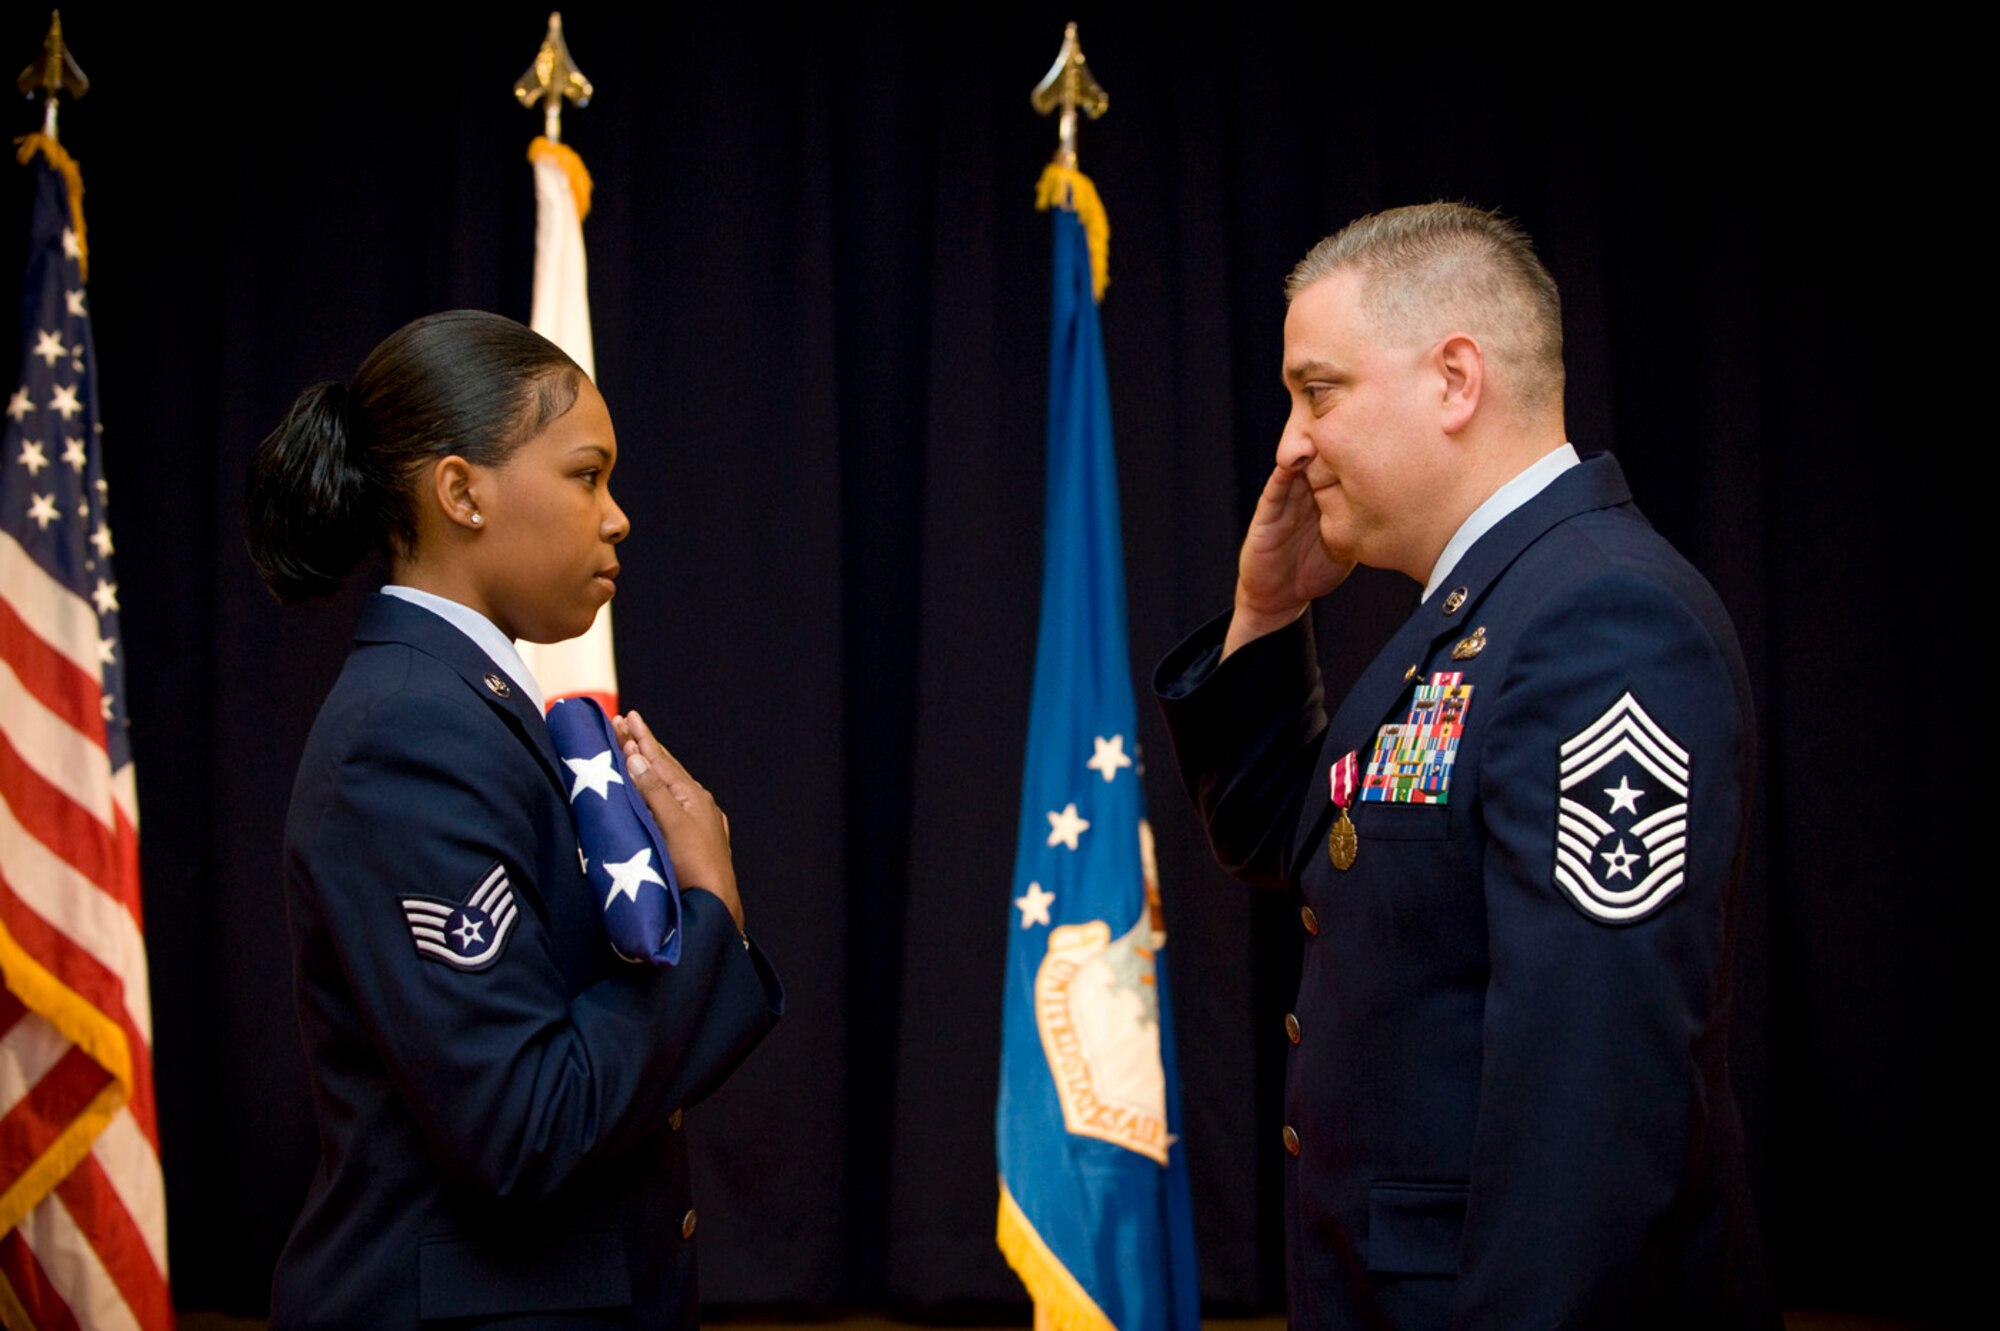 MISAWA AIR BASE, Japan -- Chief Master Sgt. Ricky Price gives a final salute to the American flag during his retirement ceremony June 19, 2009. Staff Sgt. Tiffany Arrington, bearing the flag, was one of the first people Chief Price met upon assuming the role of command chief master sergeant of the 35th Fighter Wing in 2008. (U.S. Air Force photo by Staff Sgt. Samuel Morse)